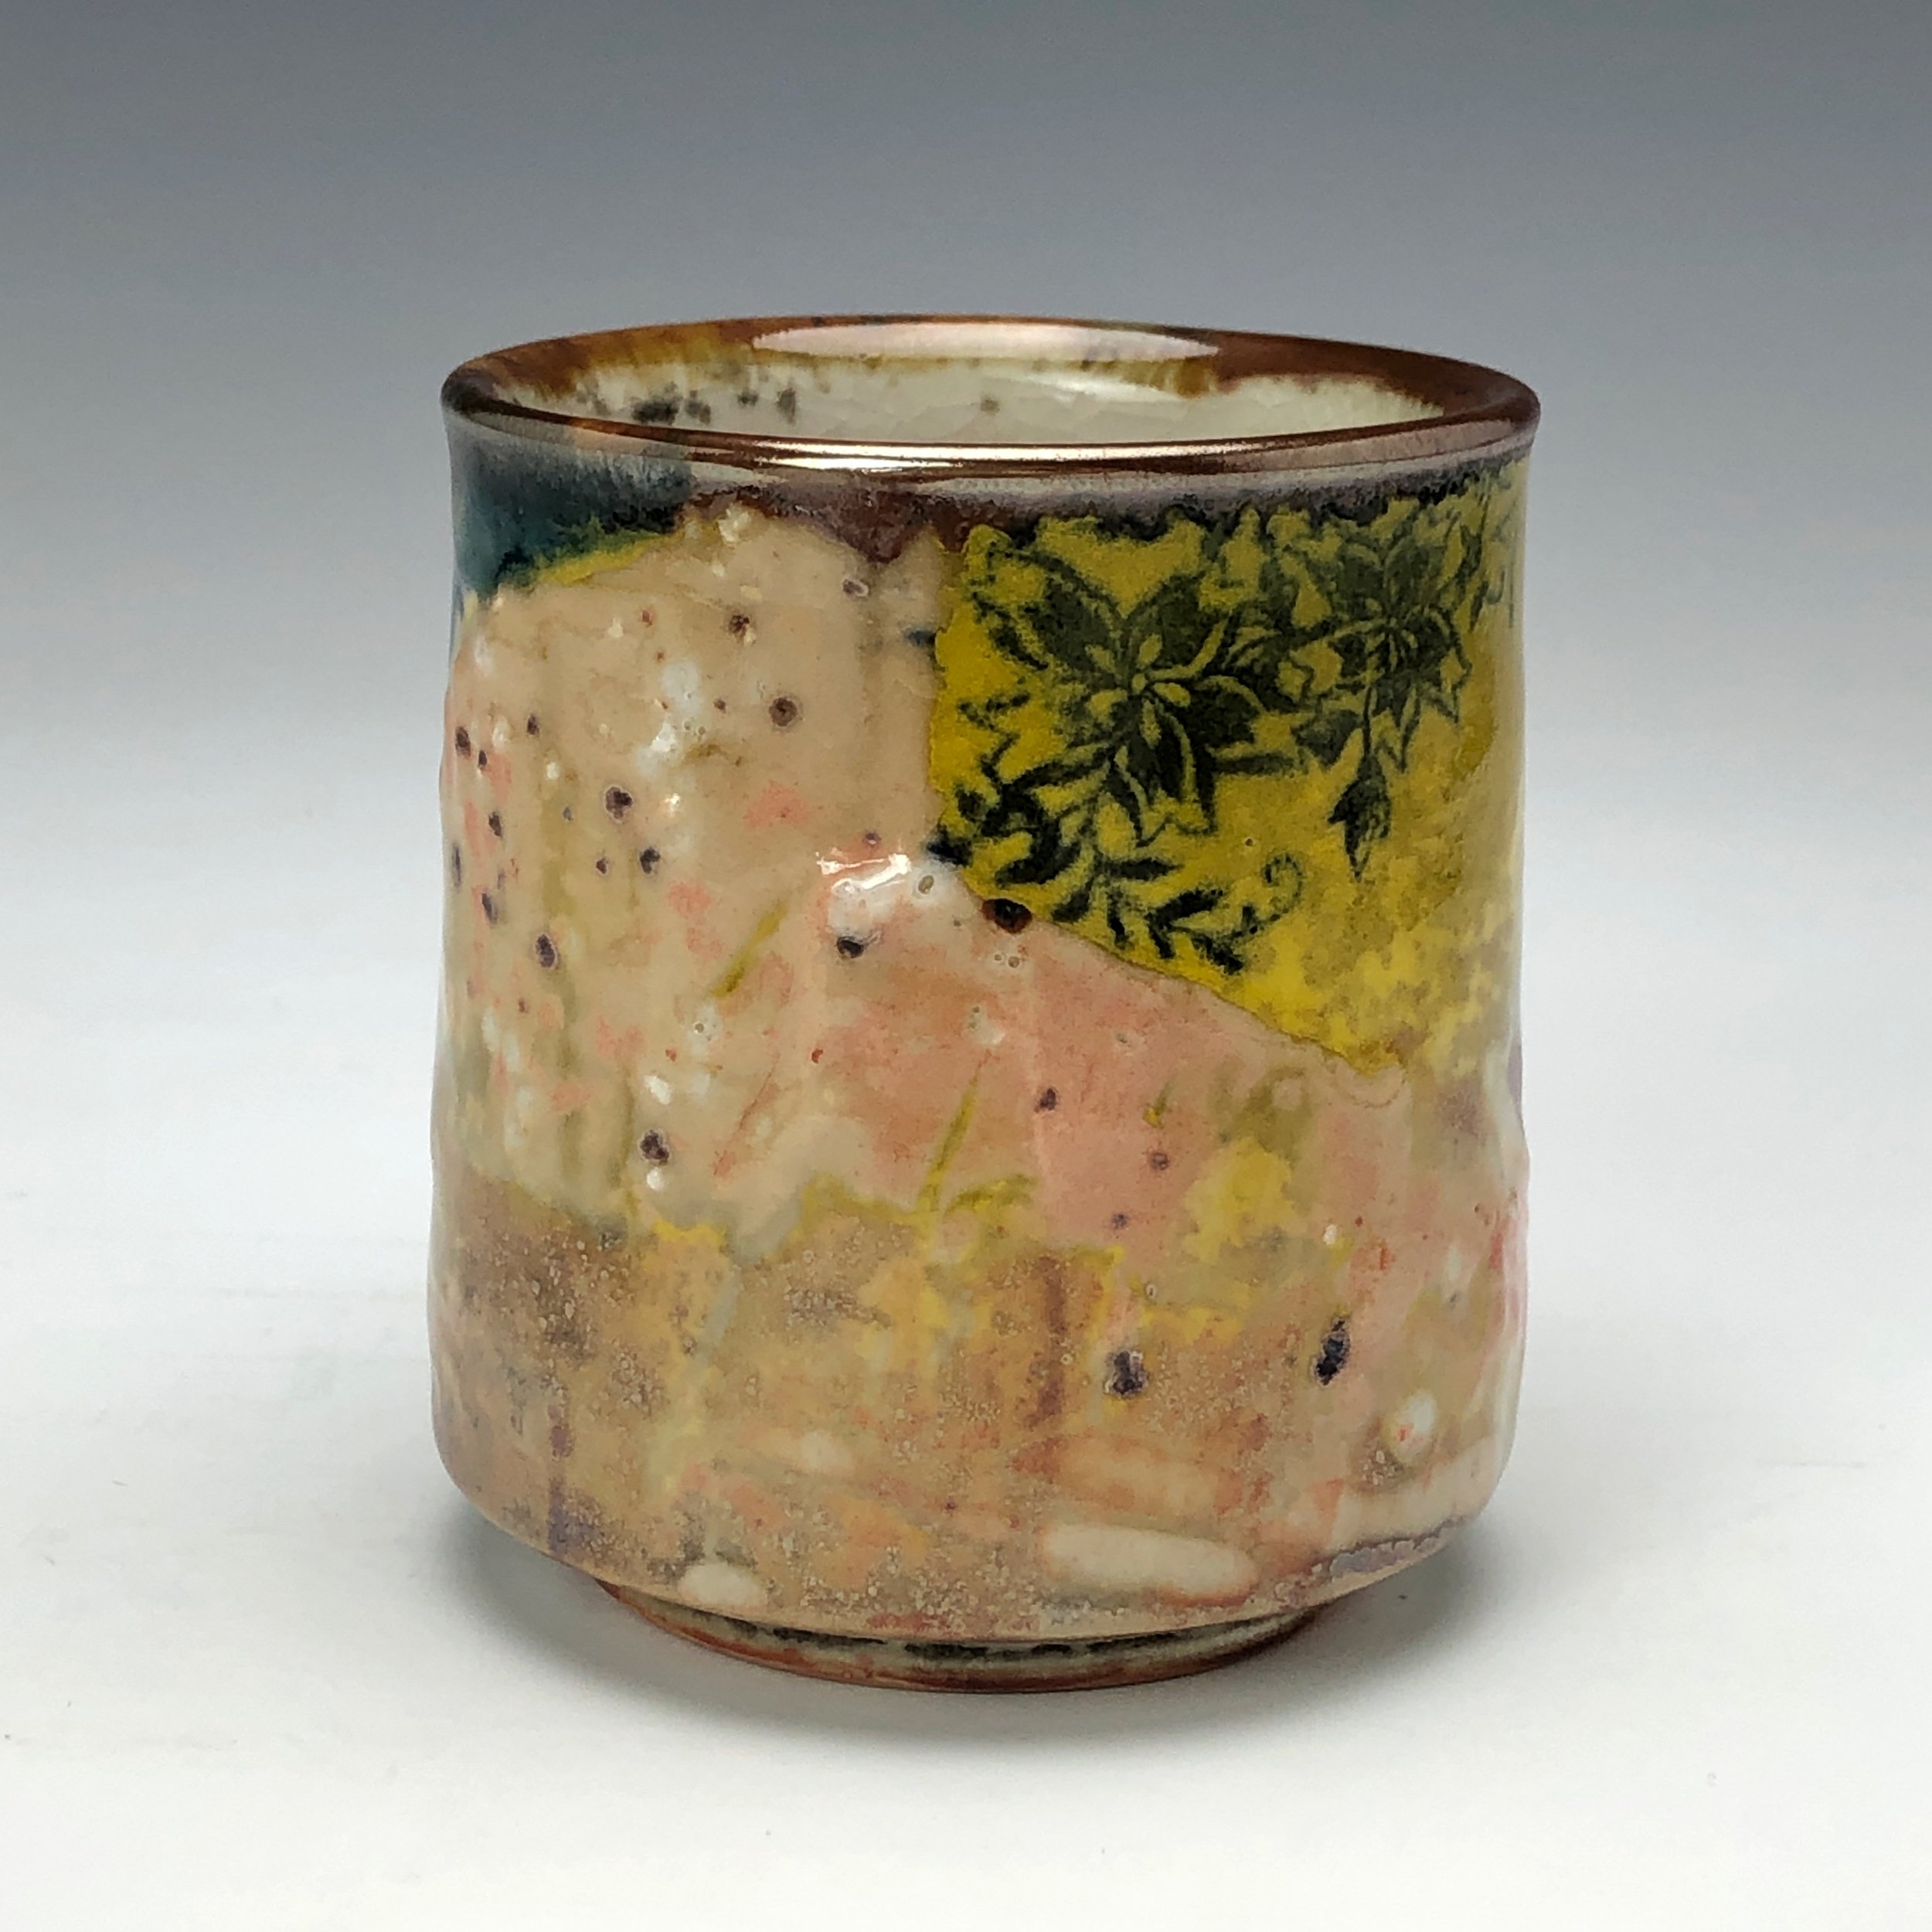  Bruce Gholson, Bulldog Pottery, Seagrove, North Carolina   Yunomi 1  - Casual drinking cup made from porcelain with Iron Luster Fish. Ceramic cup also has swipes of yellow and blue with a cobalt blue transfer. A textural shino is also glazed onto th